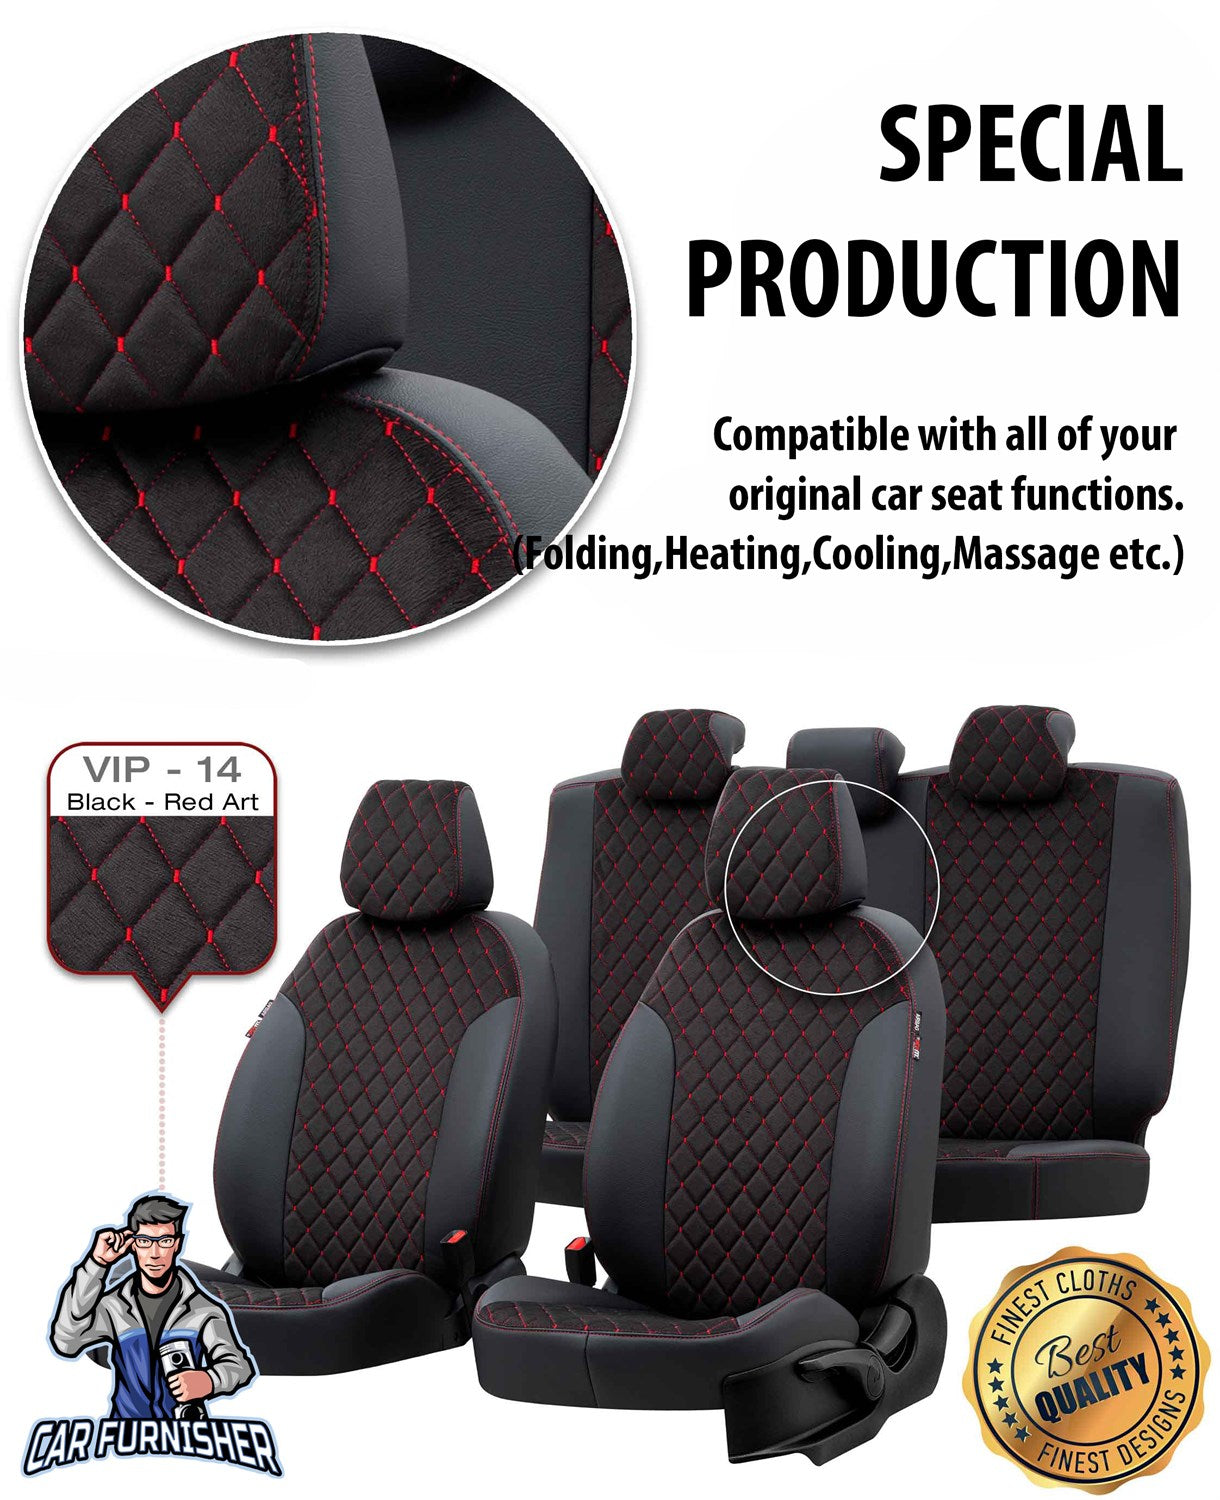 Toyota Prius Seat Cover Madrid Foal Feather Design Smoked Leather & Foal Feather